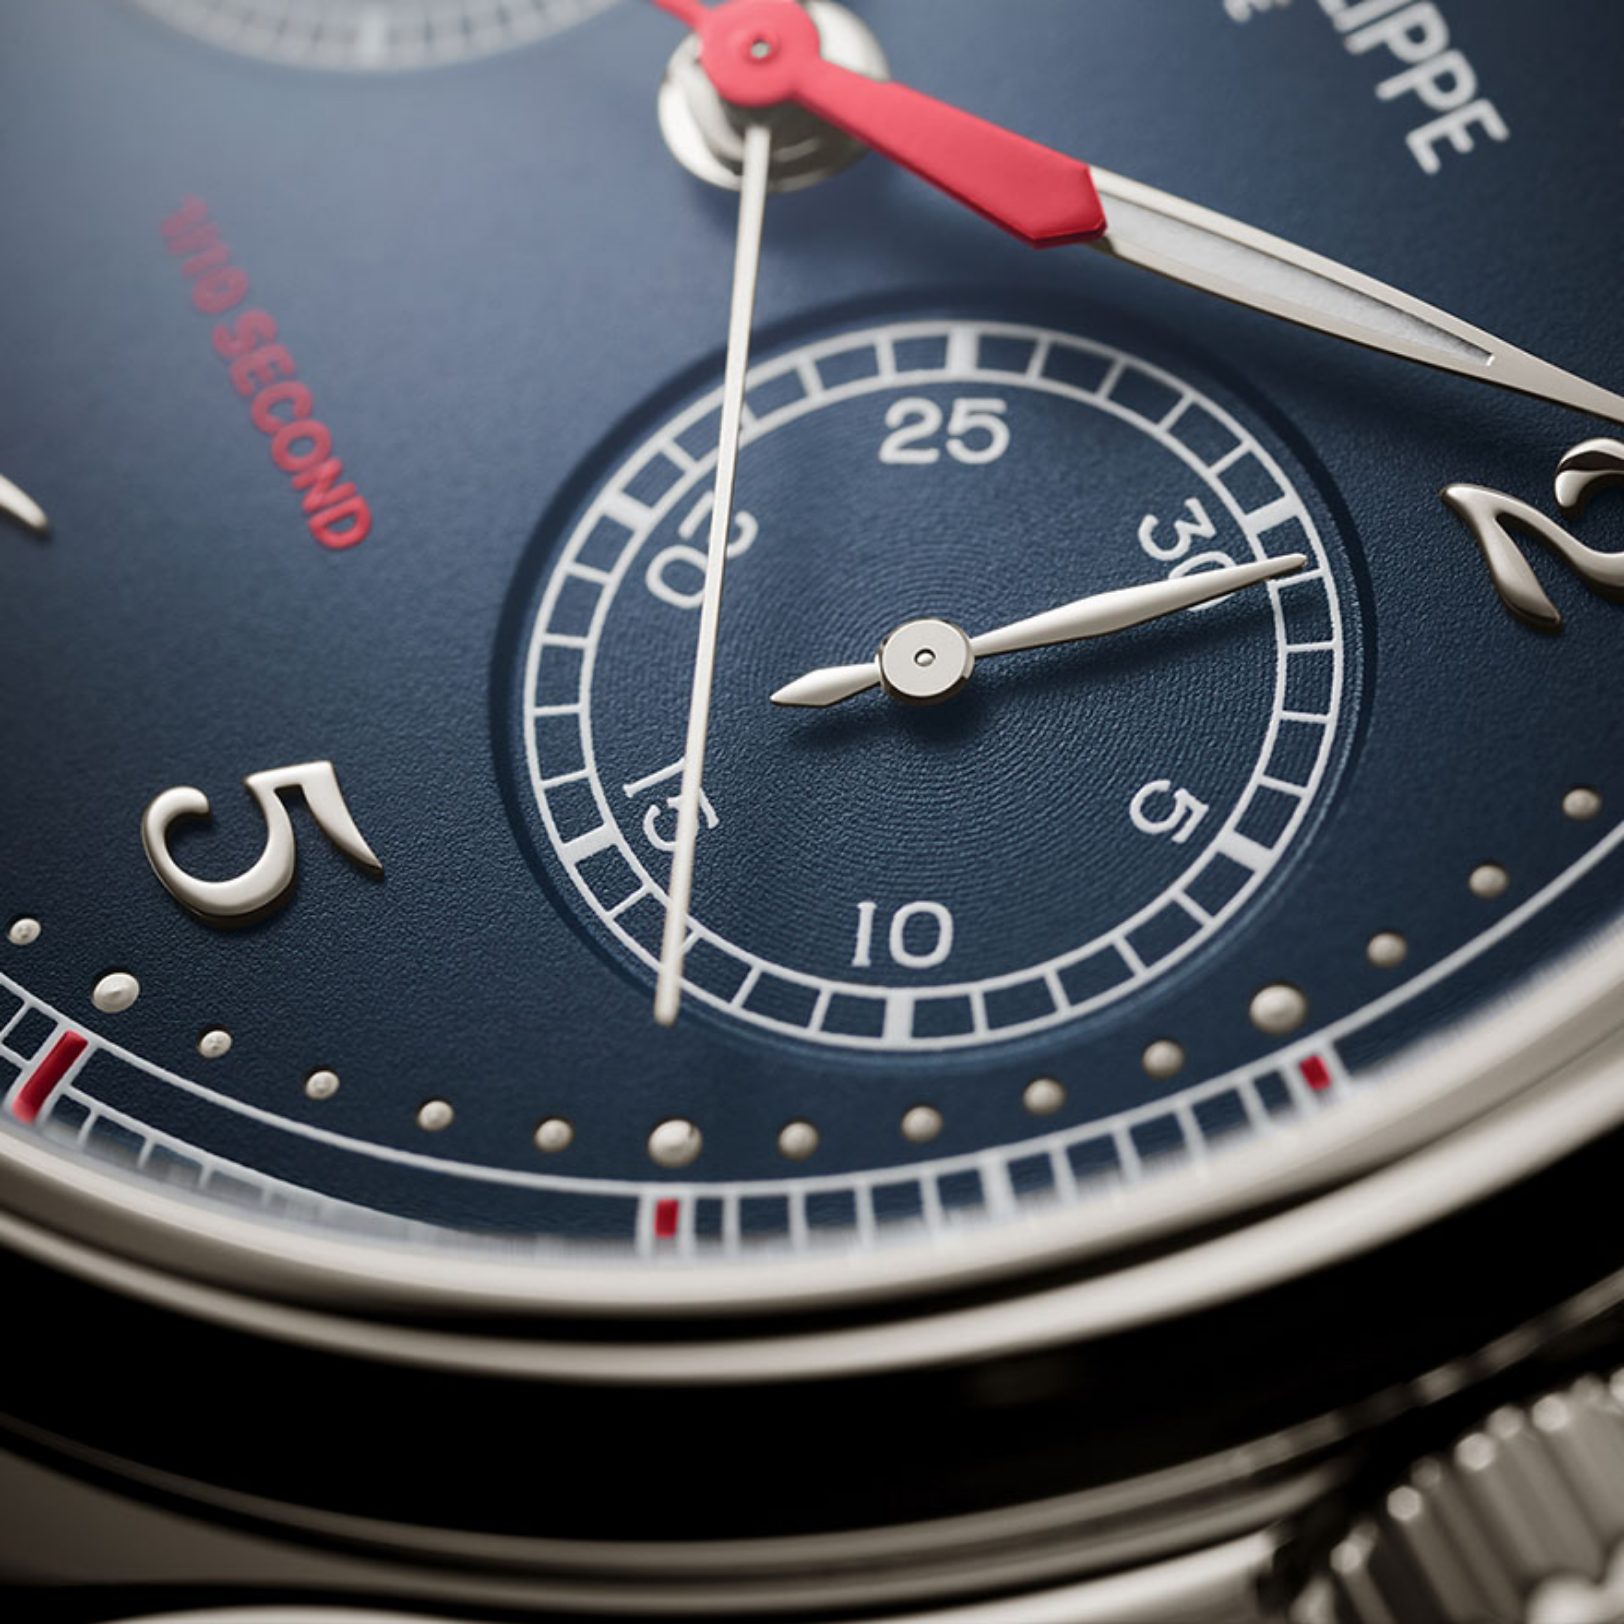 1/10th Second Monopusher Chronograph gallery 9